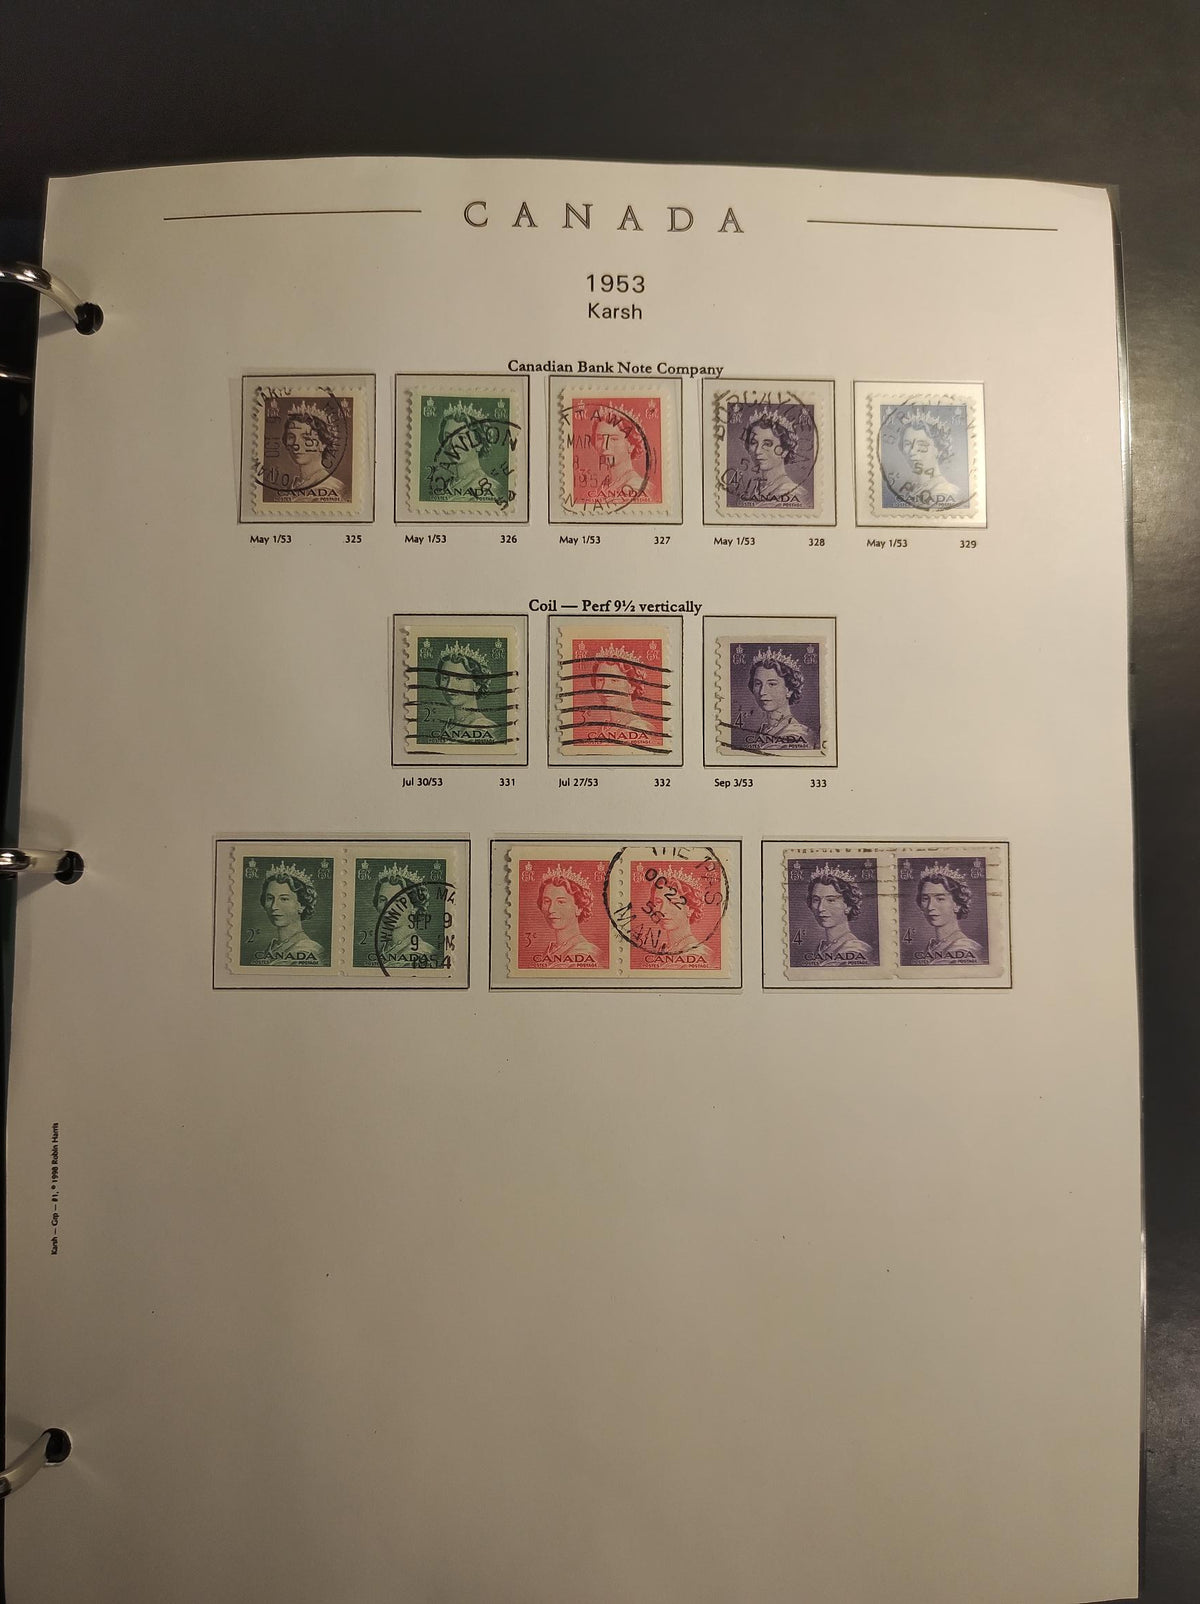 0325CA2208 - Karsh Issue Specialized Collection